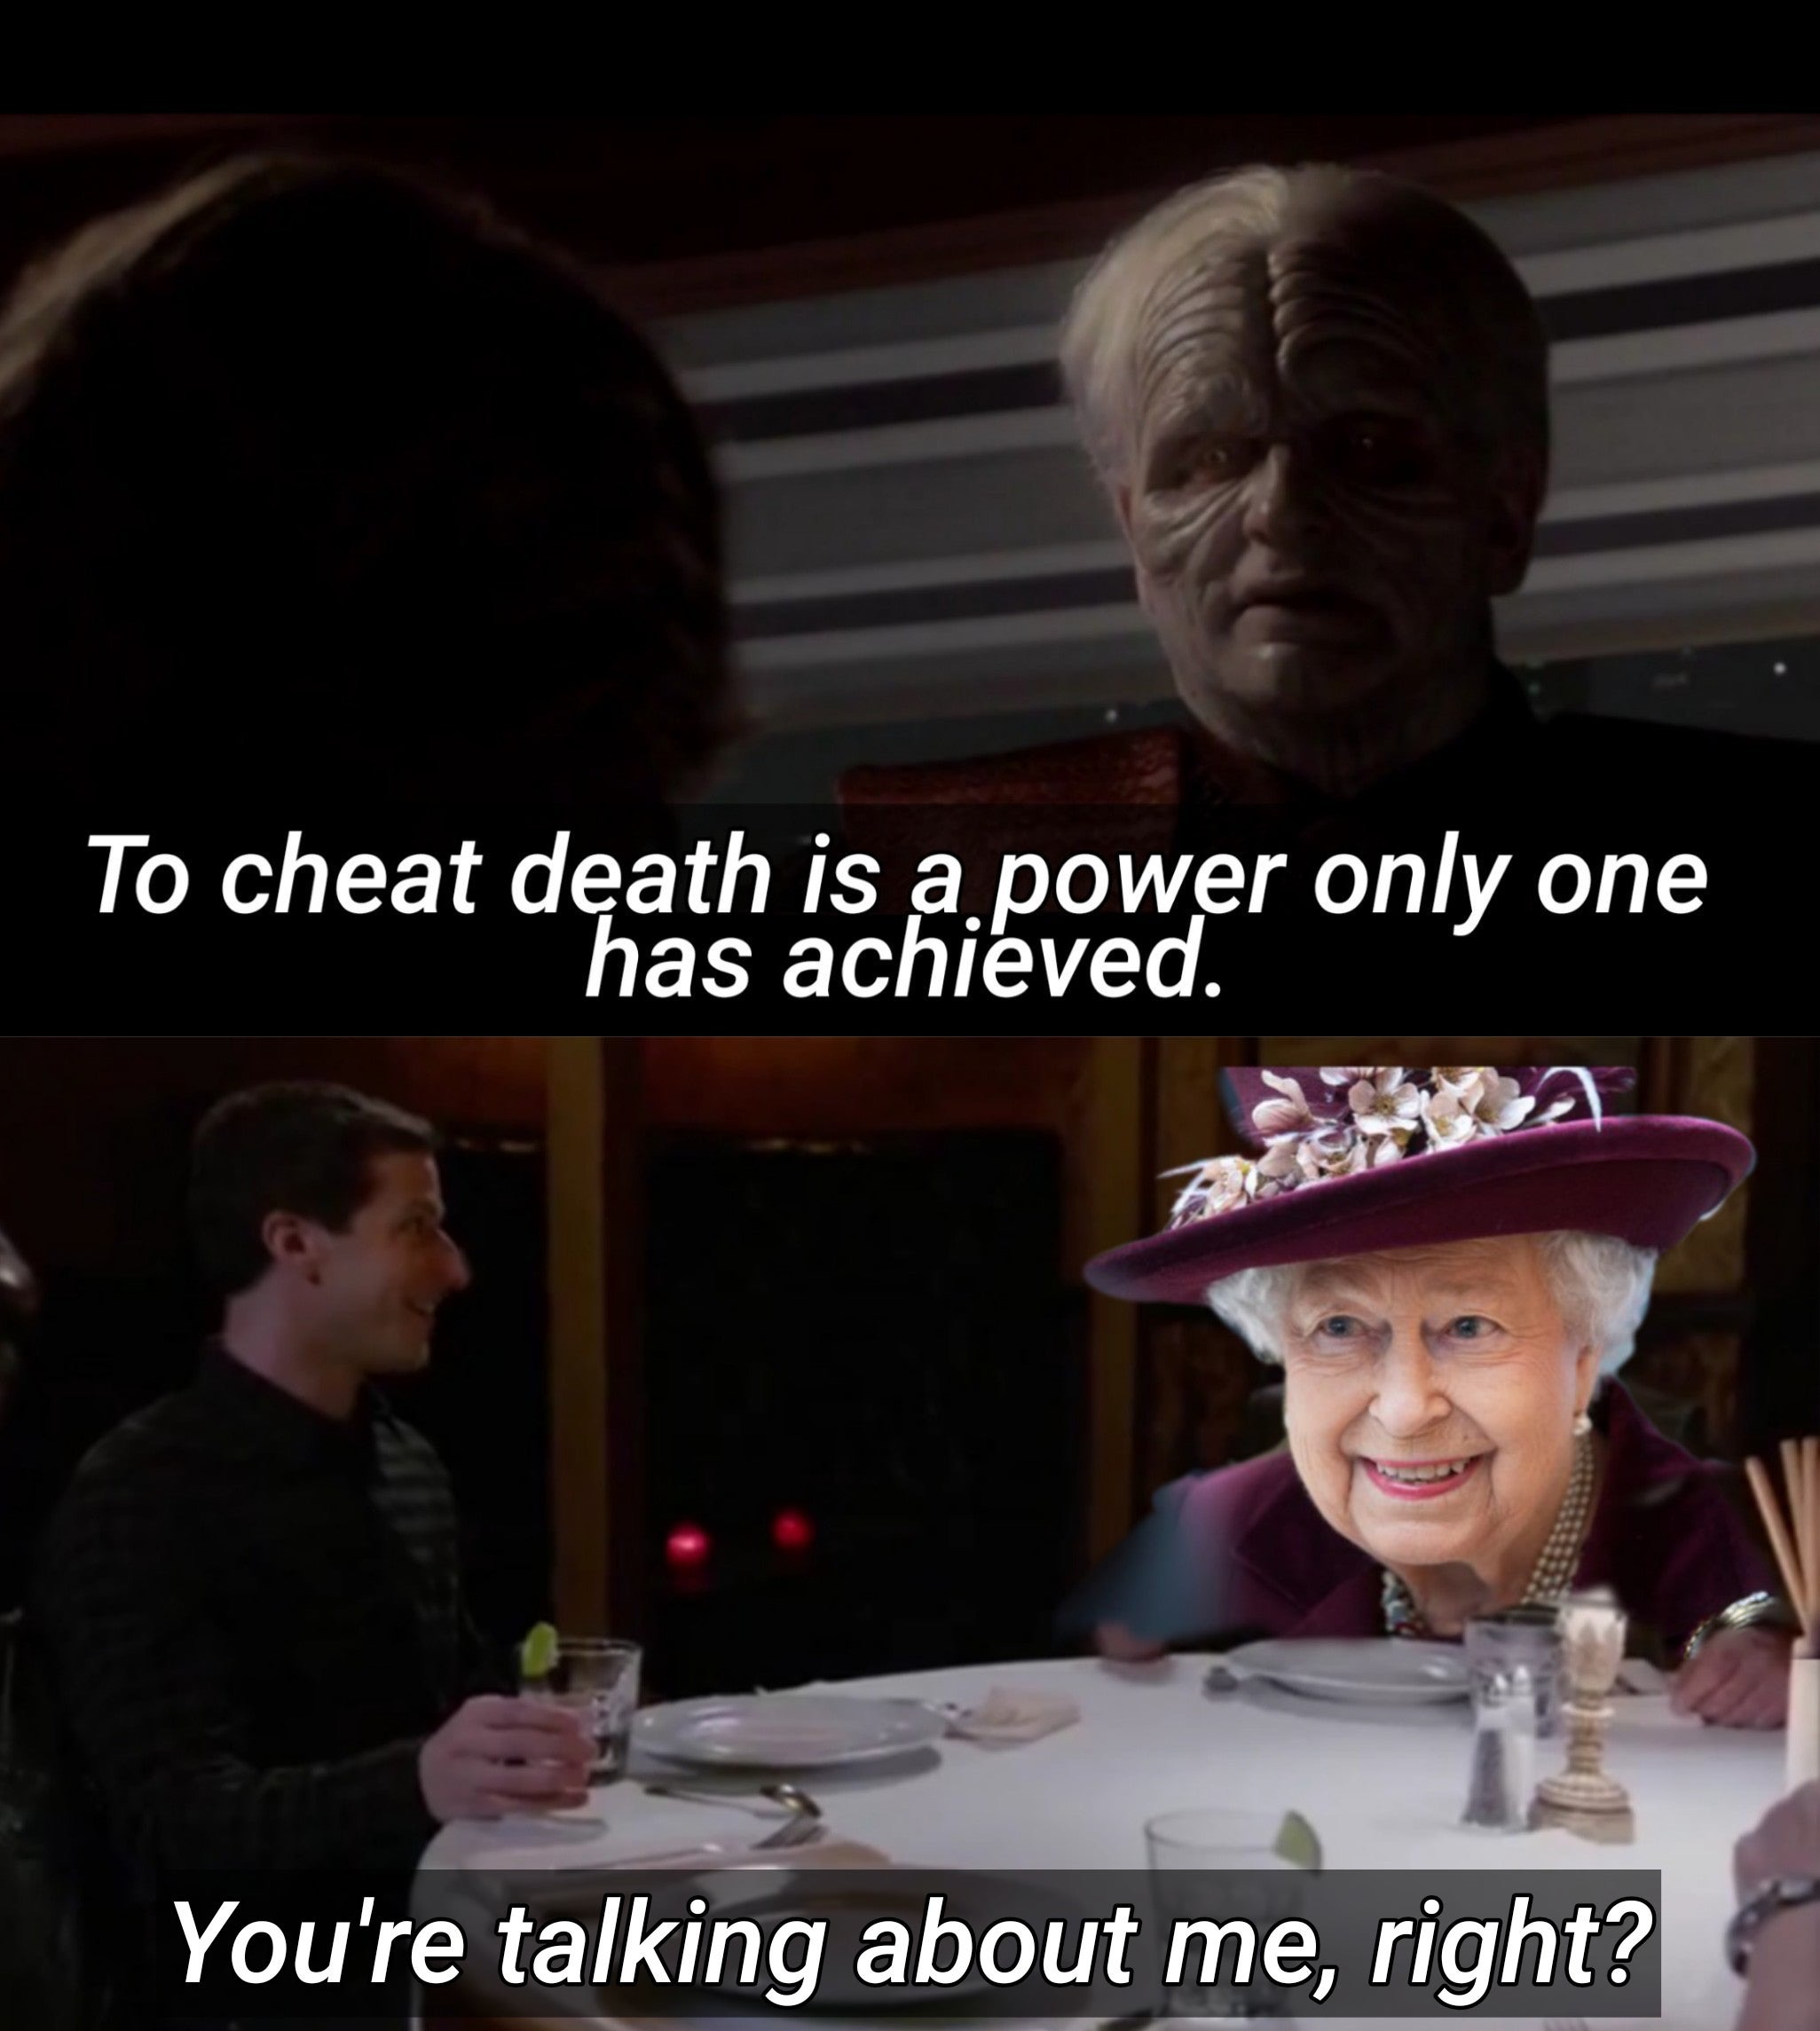 photo caption - To cheat death is a power only one _has achieved. You're talking about me, right?